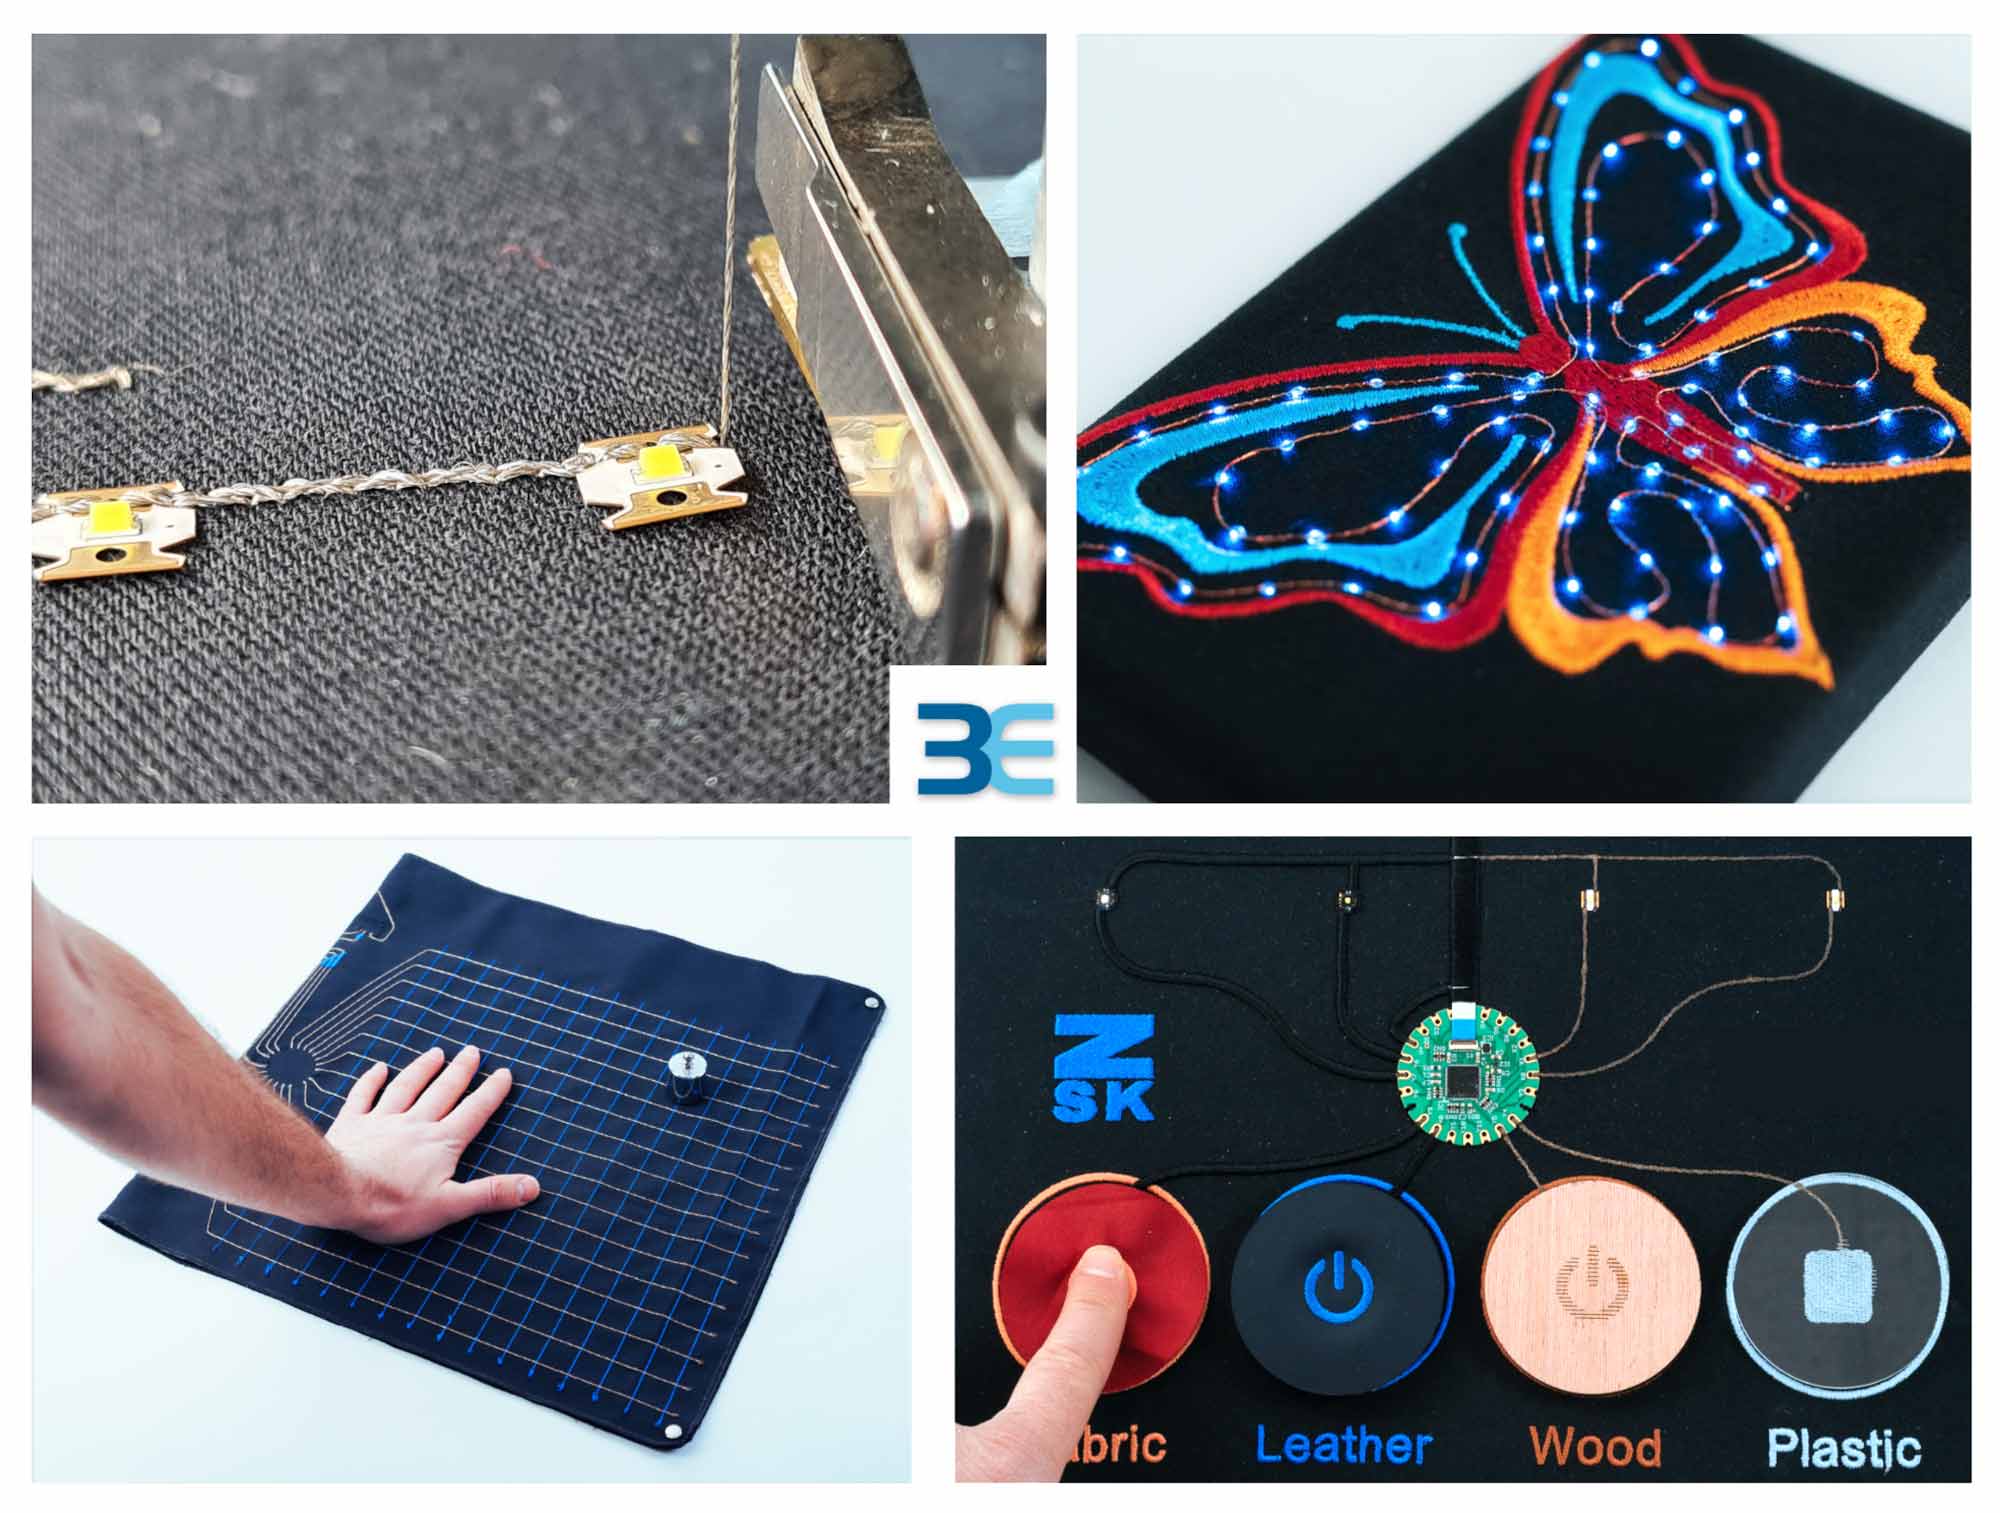 Workshop 2: Integration of LEDs and Control Elements into Textiles